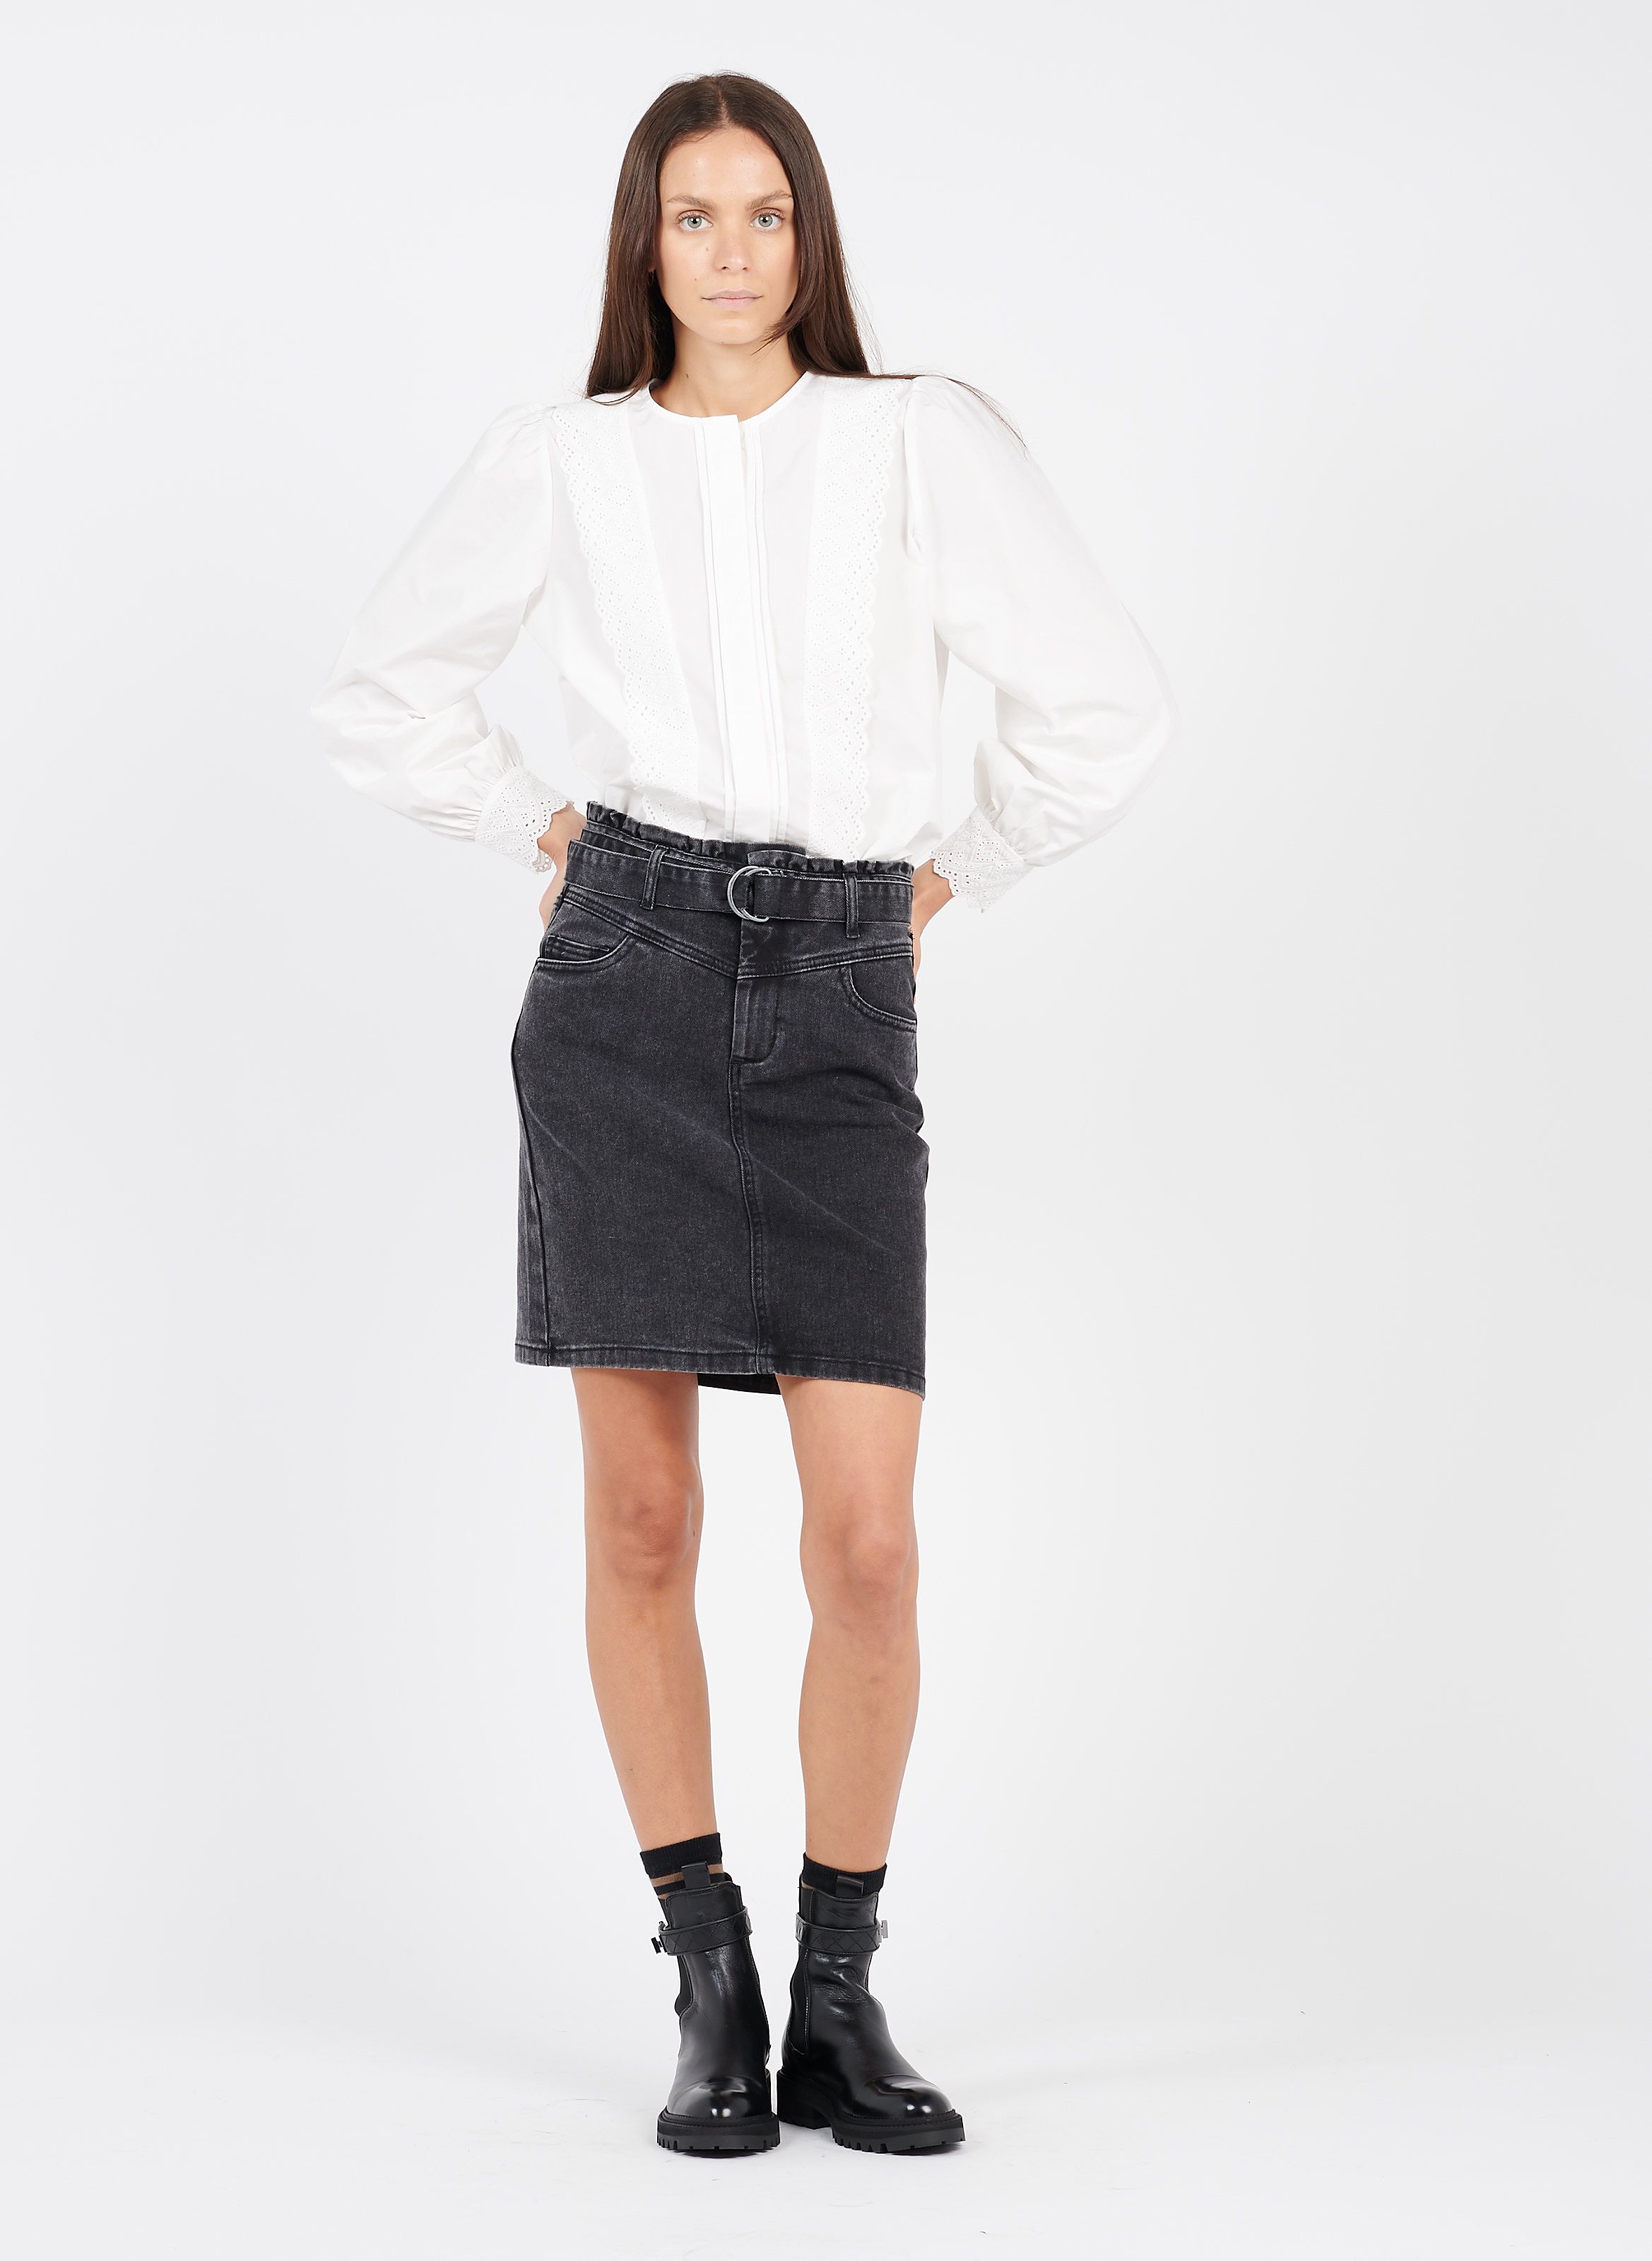 jean skirt with black boots